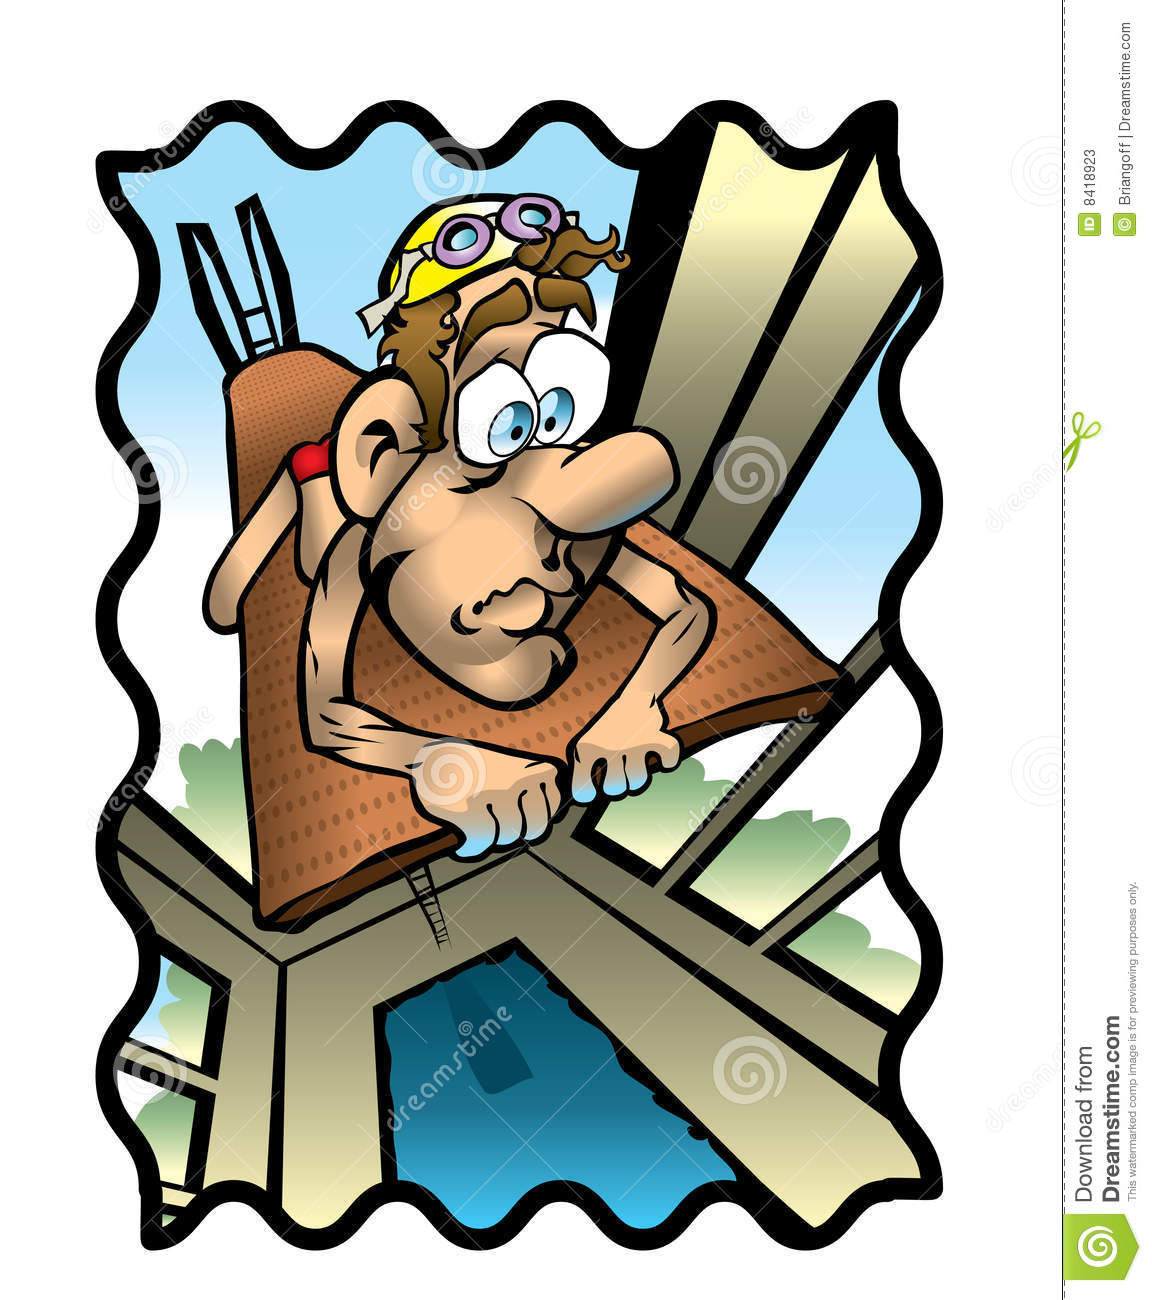 Fear Of Heights Clipart Scared Diver Stock Photos   Image  8418923